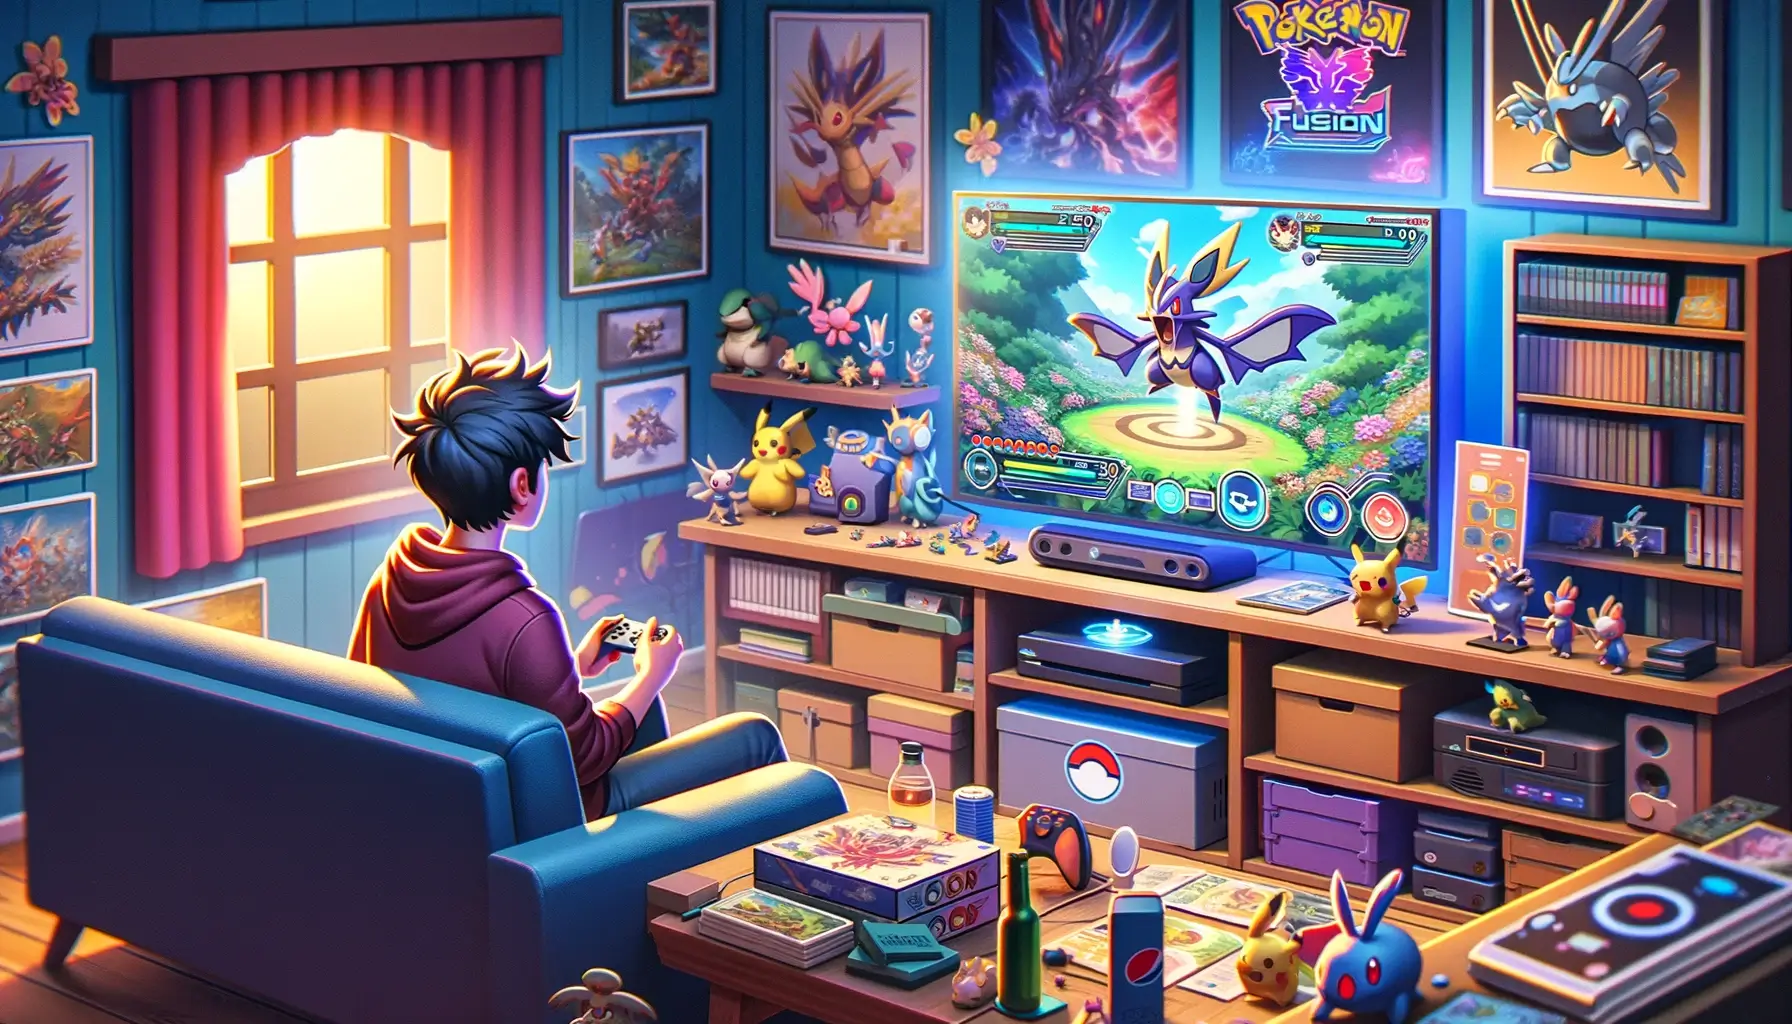 How to Play Pokemon Fusion. The image will depict a player sitting in a cozy gaming environment,